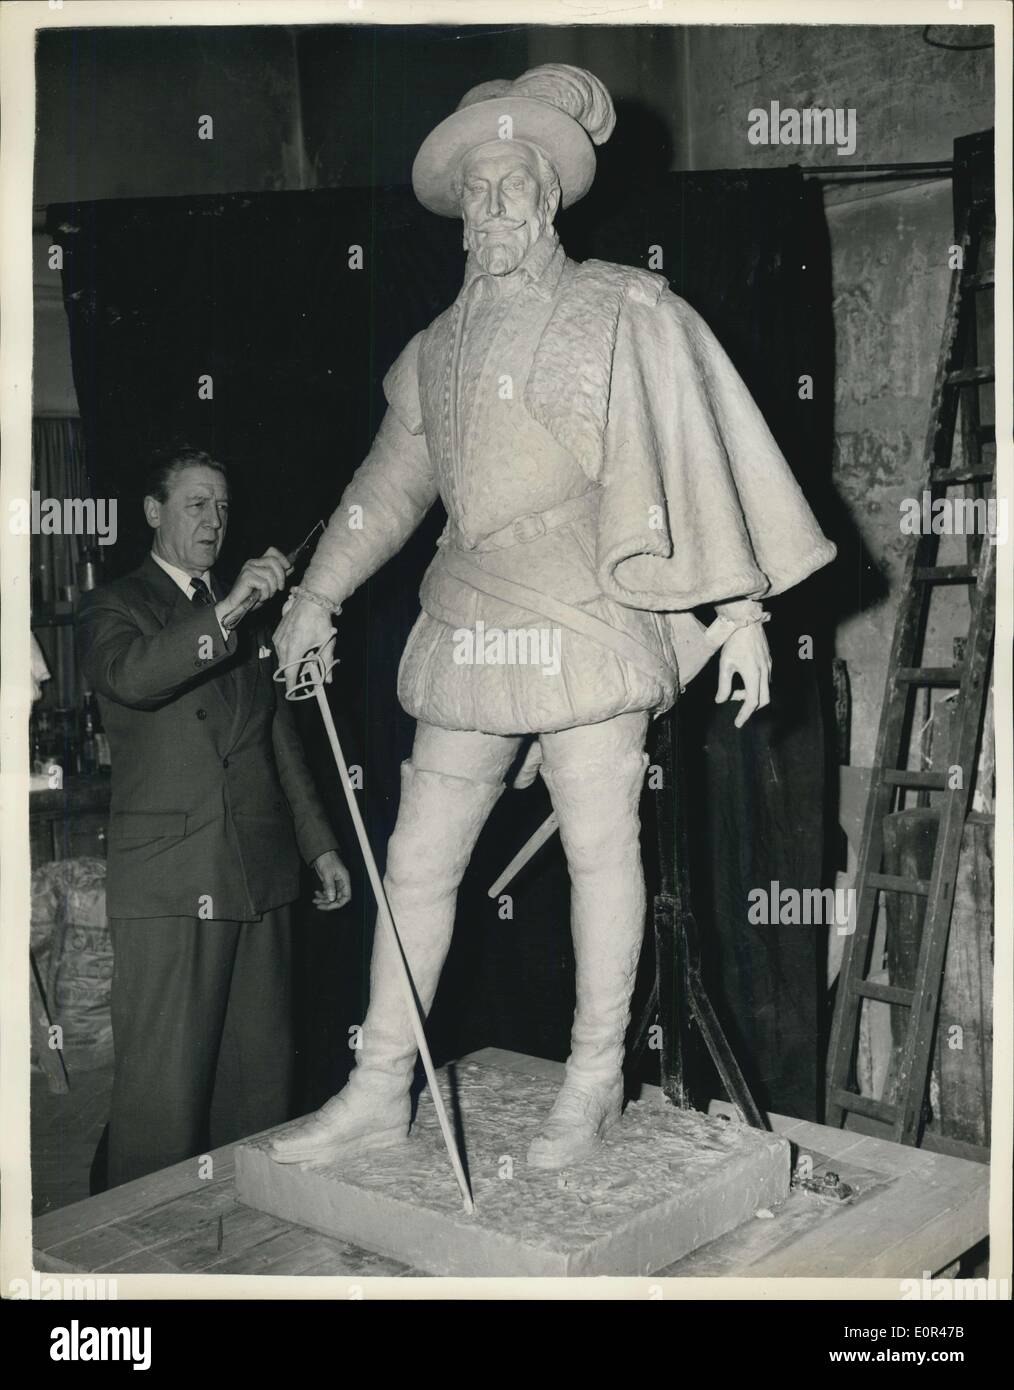 Nov. 29, 1957 - New Statue of Sir Walter Raleigh for London: Mr. William McMillan (70) the sculptor who produced the George VI Memorial overlooking the ~all is now putting the finishing touches to his new Statue of Sir Walter Raleigh which is to be erected in London next year. The state was commissioned by a group of Friends of the English Speaking Union is connection with the 350th. anniversary this year of Jamestown Virginia. Photo shows Mr. William McMillan with his almost completed statue at his London studio. Stock Photo